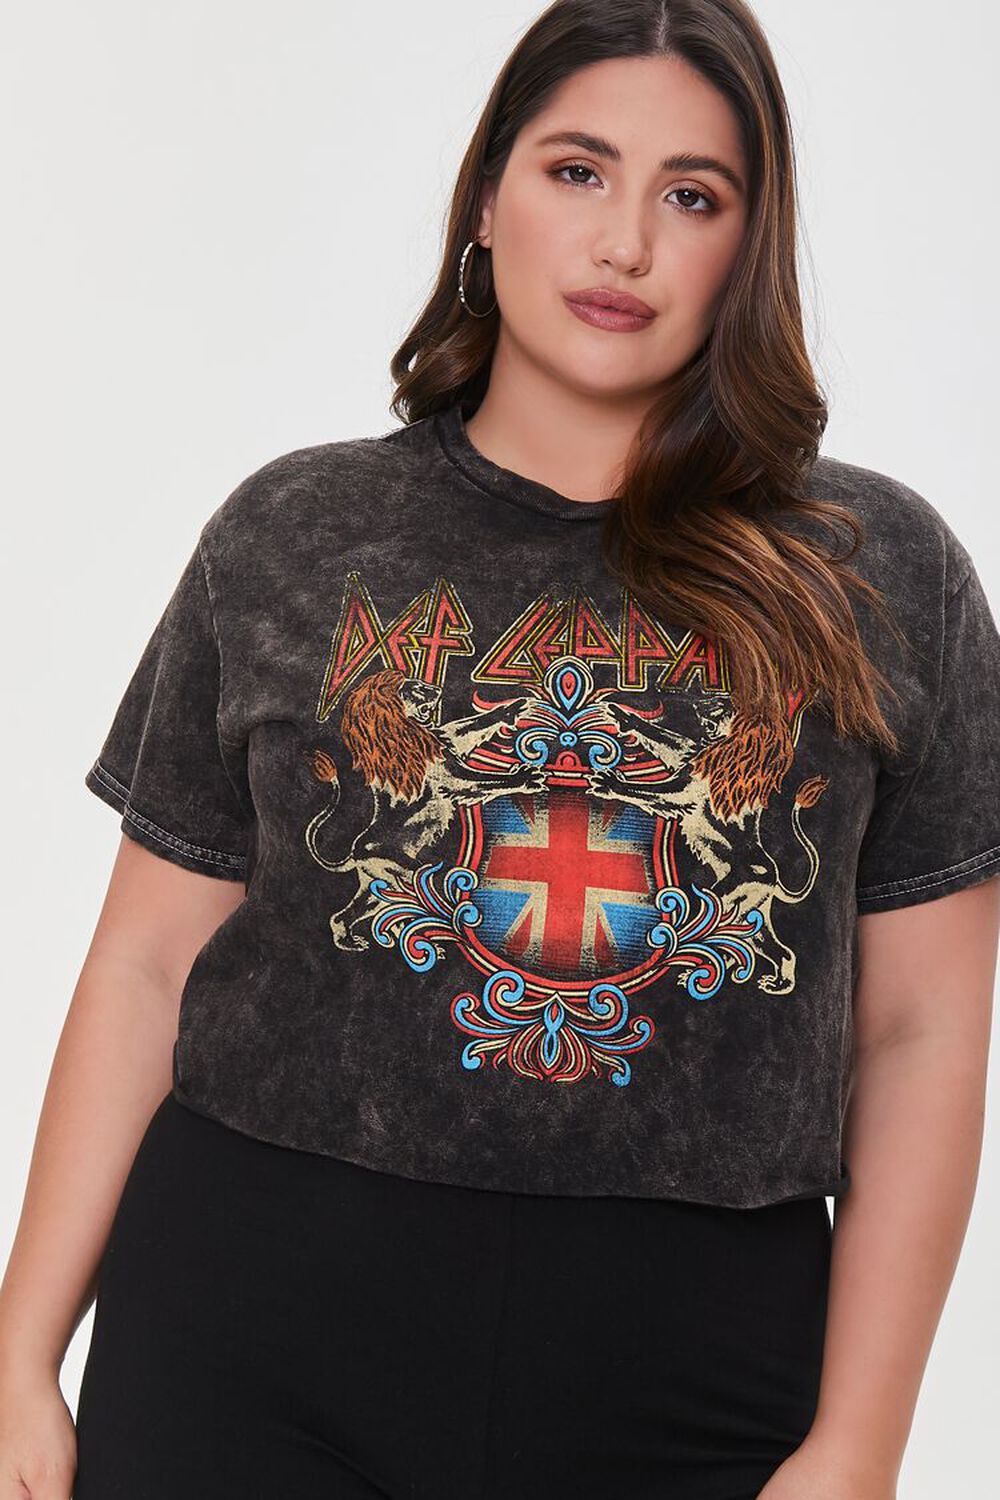 CHARCOAL/MULTI Plus Size Cropped Def Leppard Graphic Tee, image 1